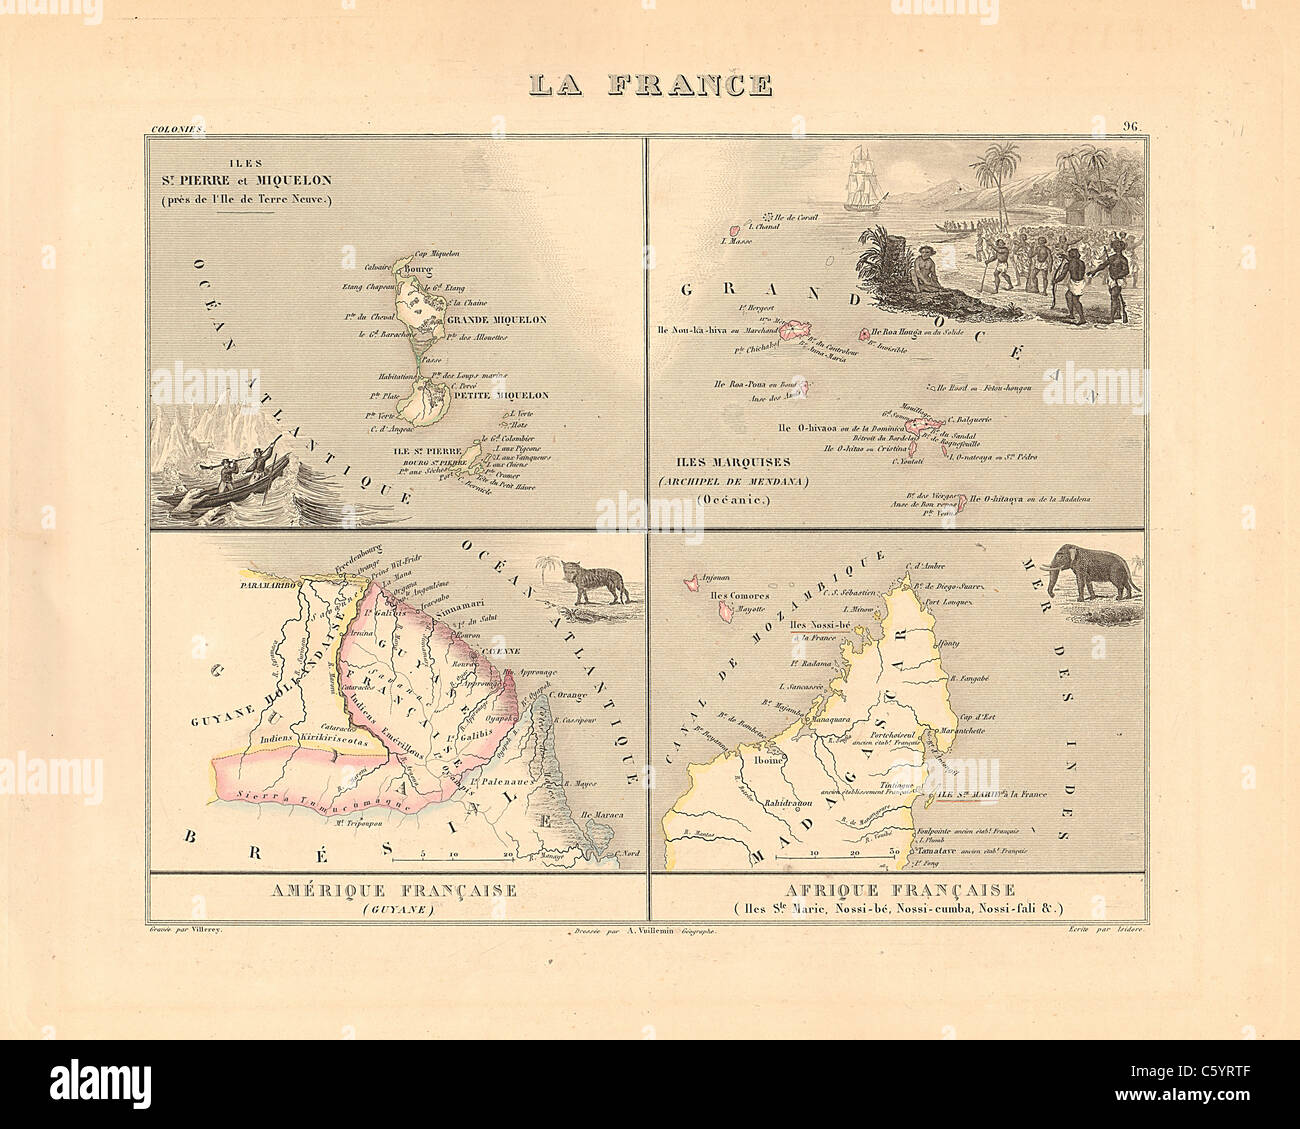 La France, Colonies -  Antiquarian Map from an 1858 French Atlas 'France and its Colonies' (La France et ses Colonies ) by Alexandre Vuillemin Stock Photo